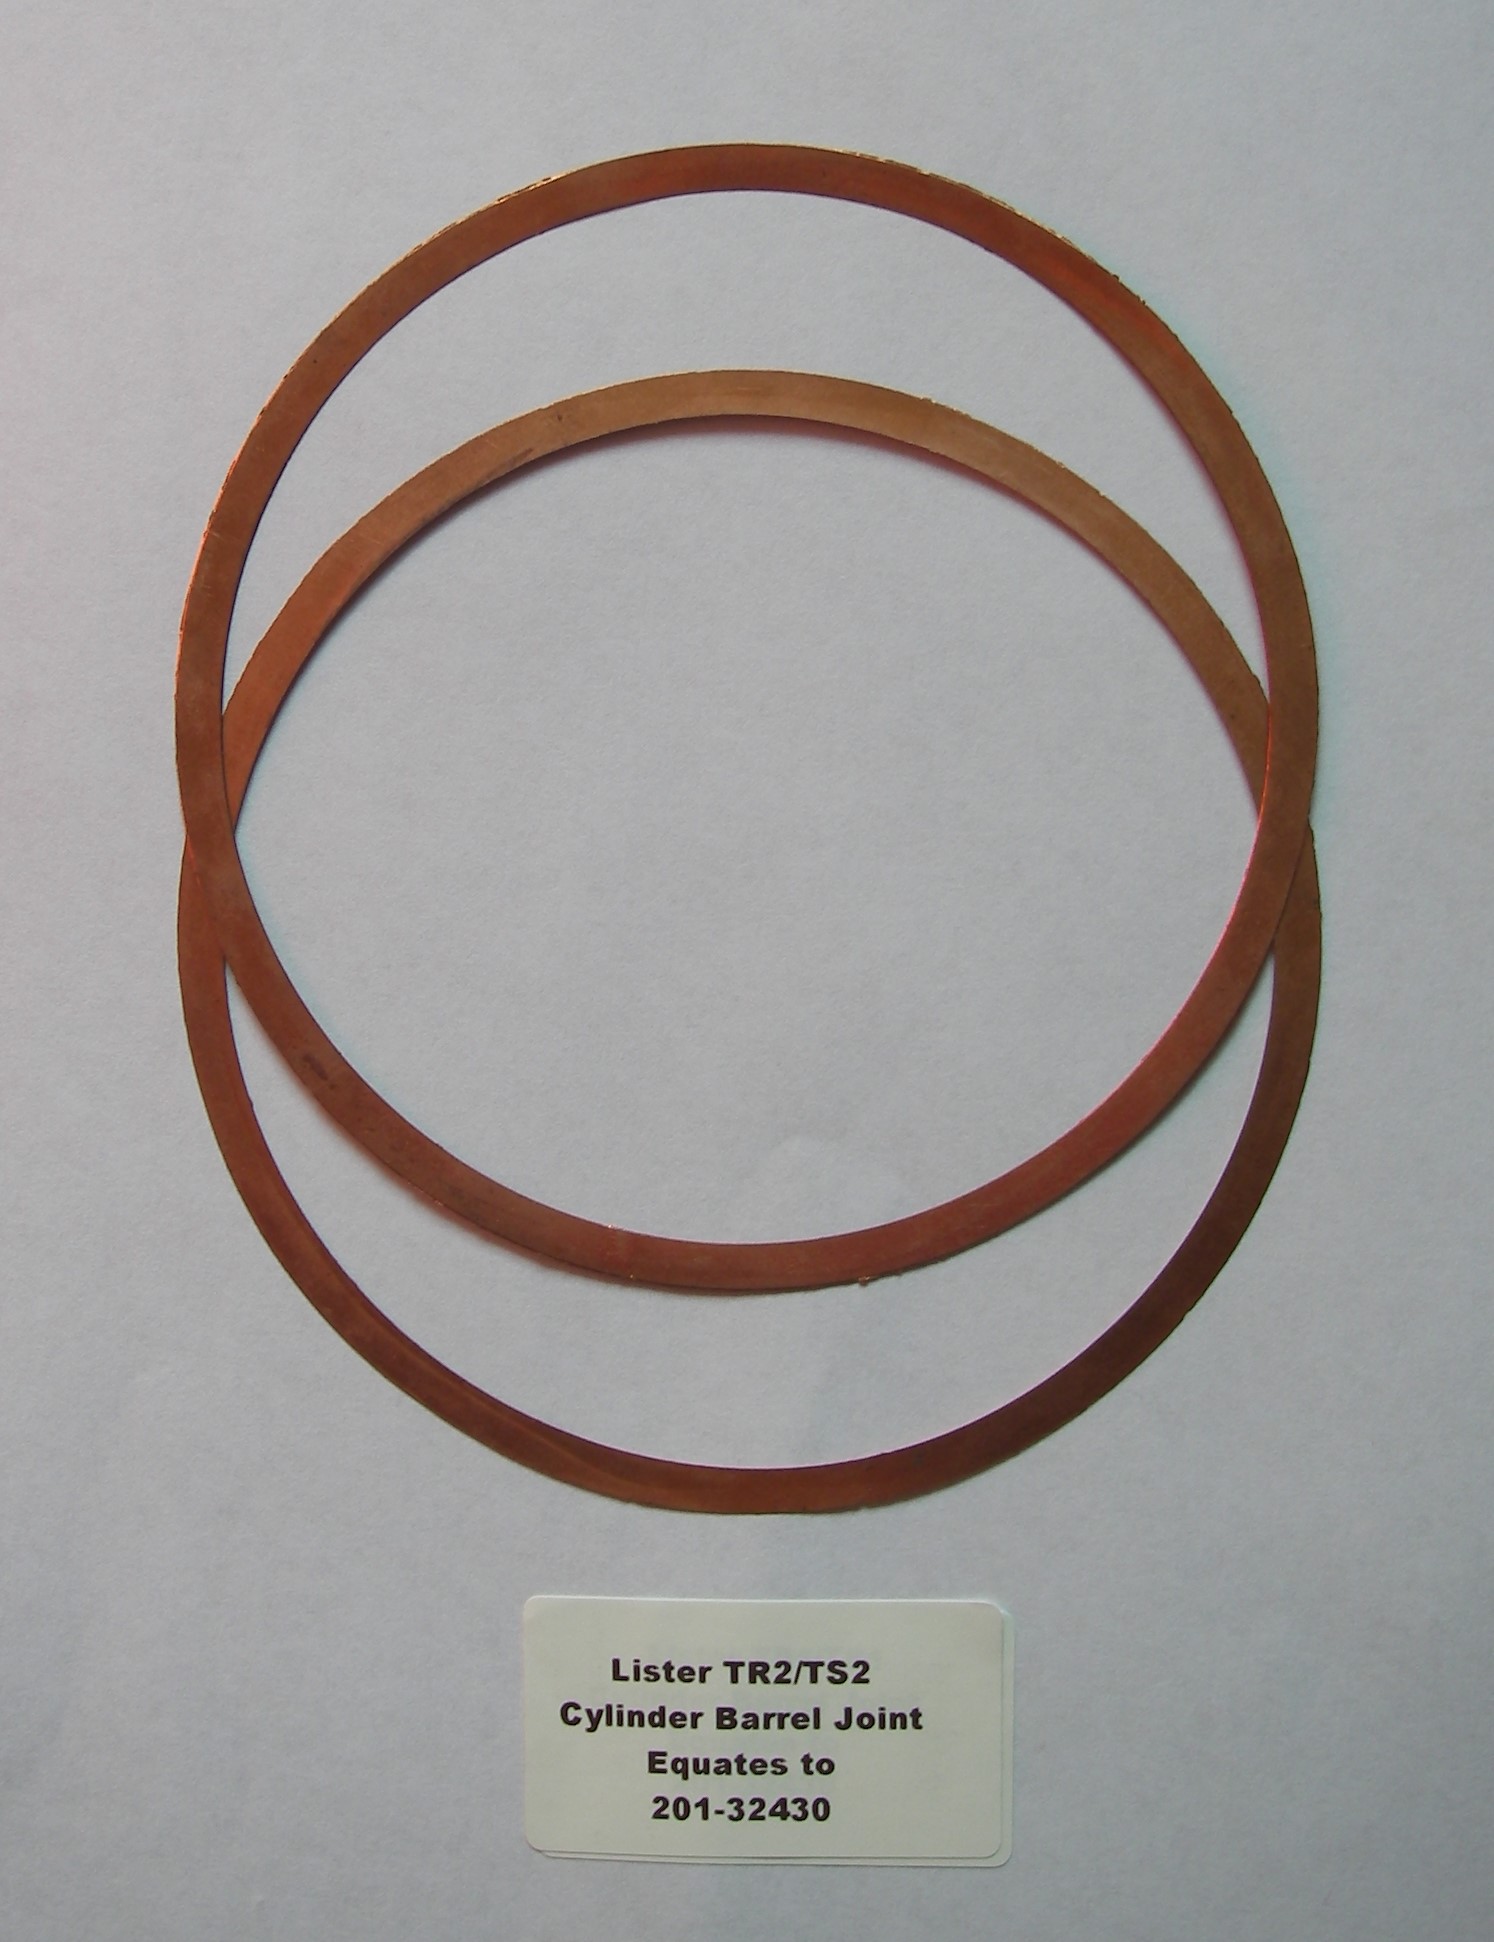 <b>Compatible with the Lister TR2 & TS2 Eng. - Copper Cylinder Barrel Joint Gaskets</b>